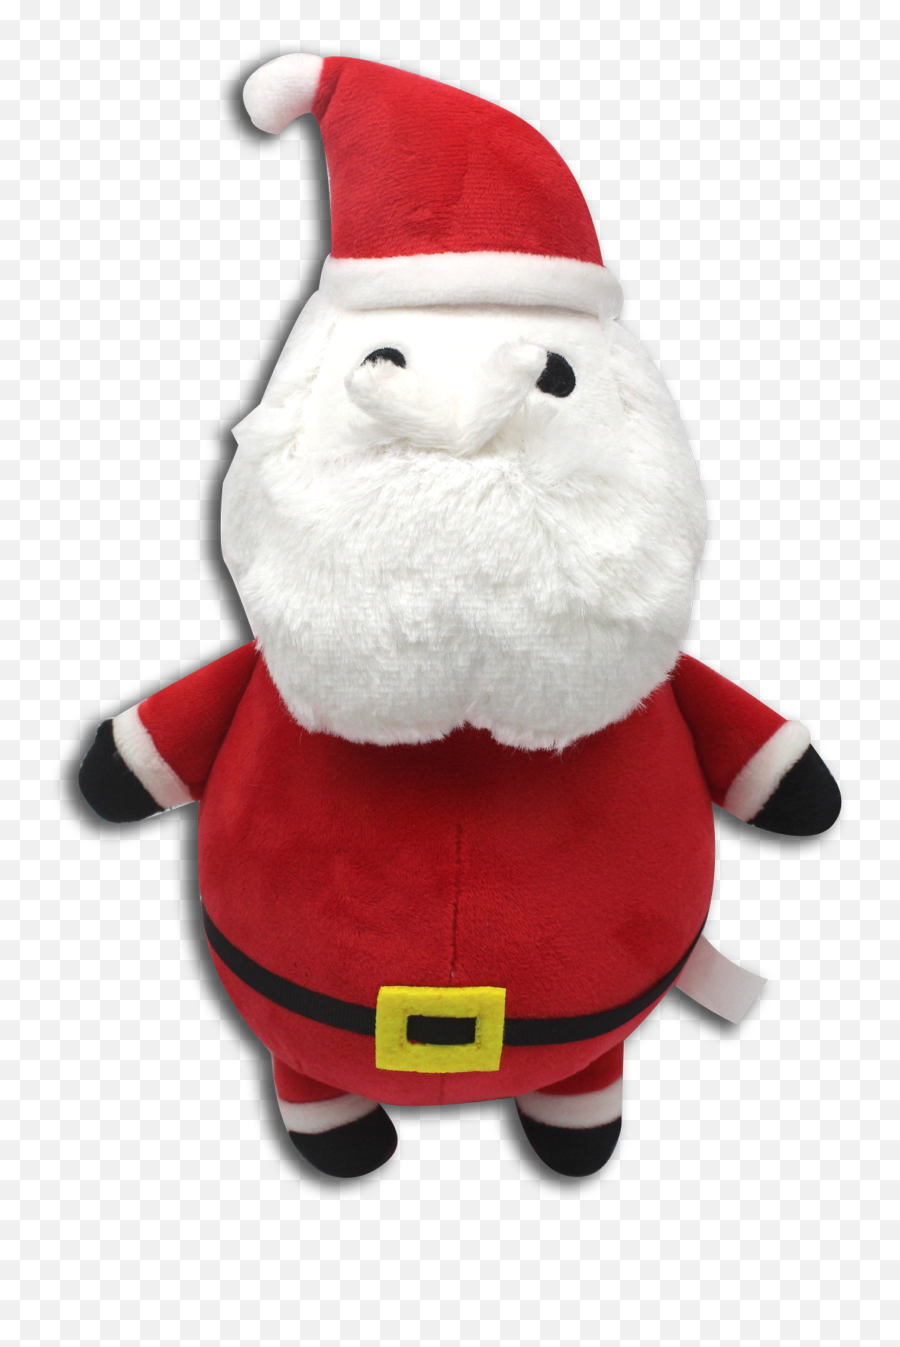 Download Santa Face Png Image With - Stuffed Toy,Santa Face Png